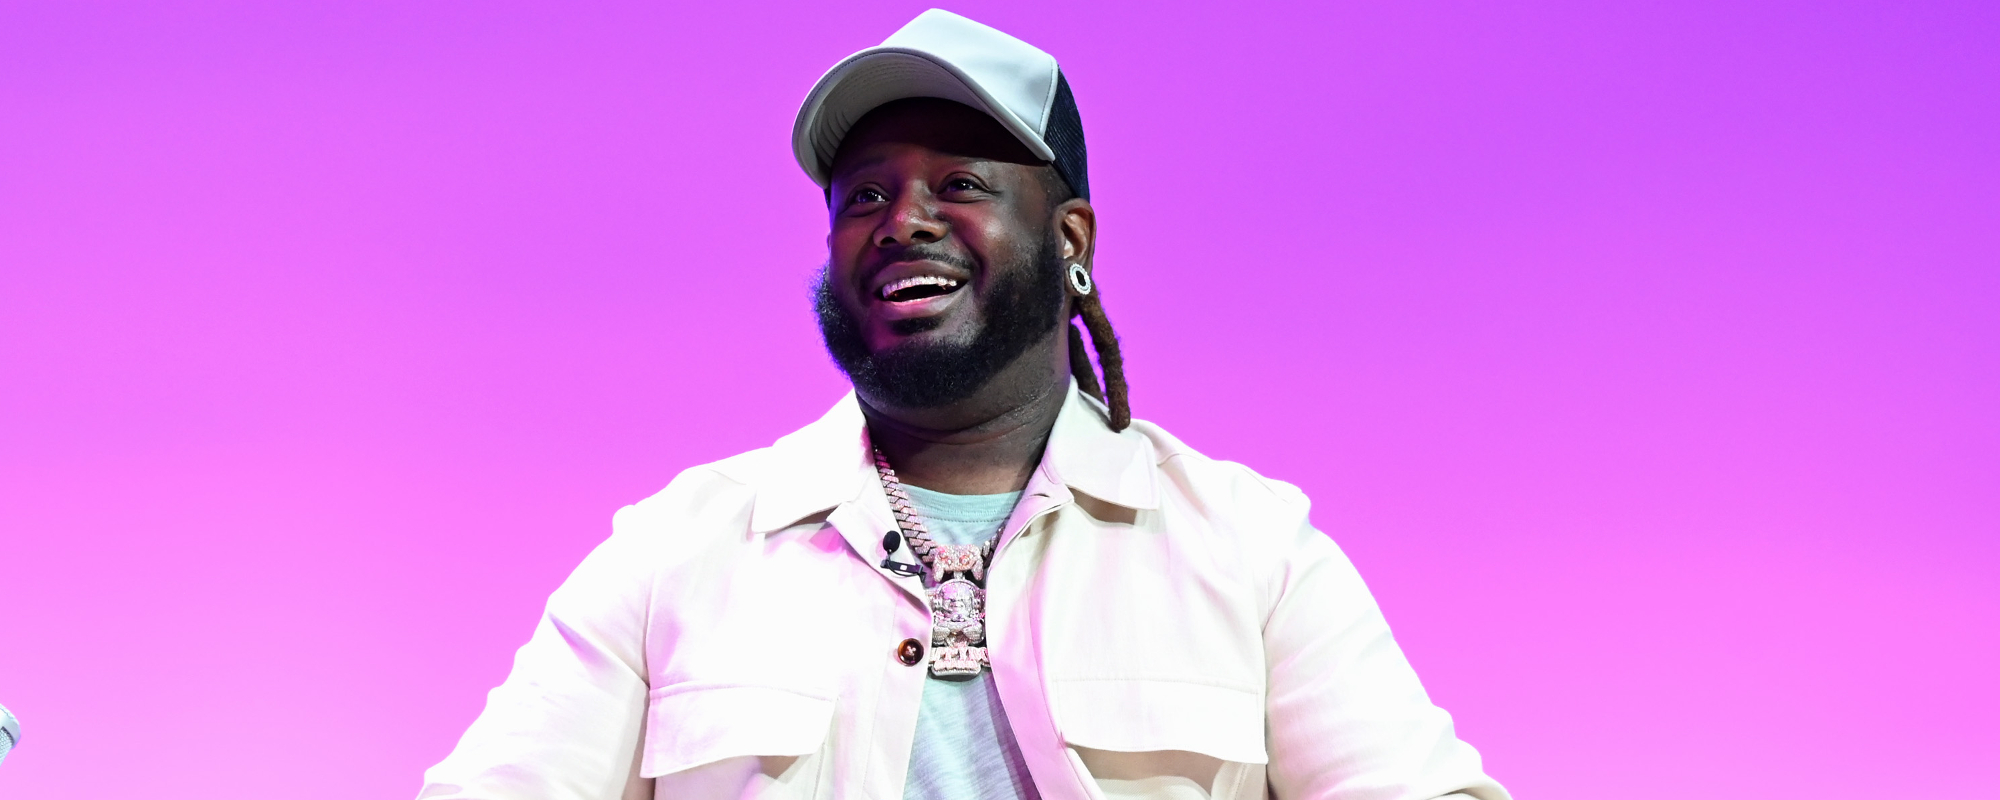 T-Pain’s “War Pigs” Cover Receives an All-Time Stamp of Approval From Ozzy Osbourne